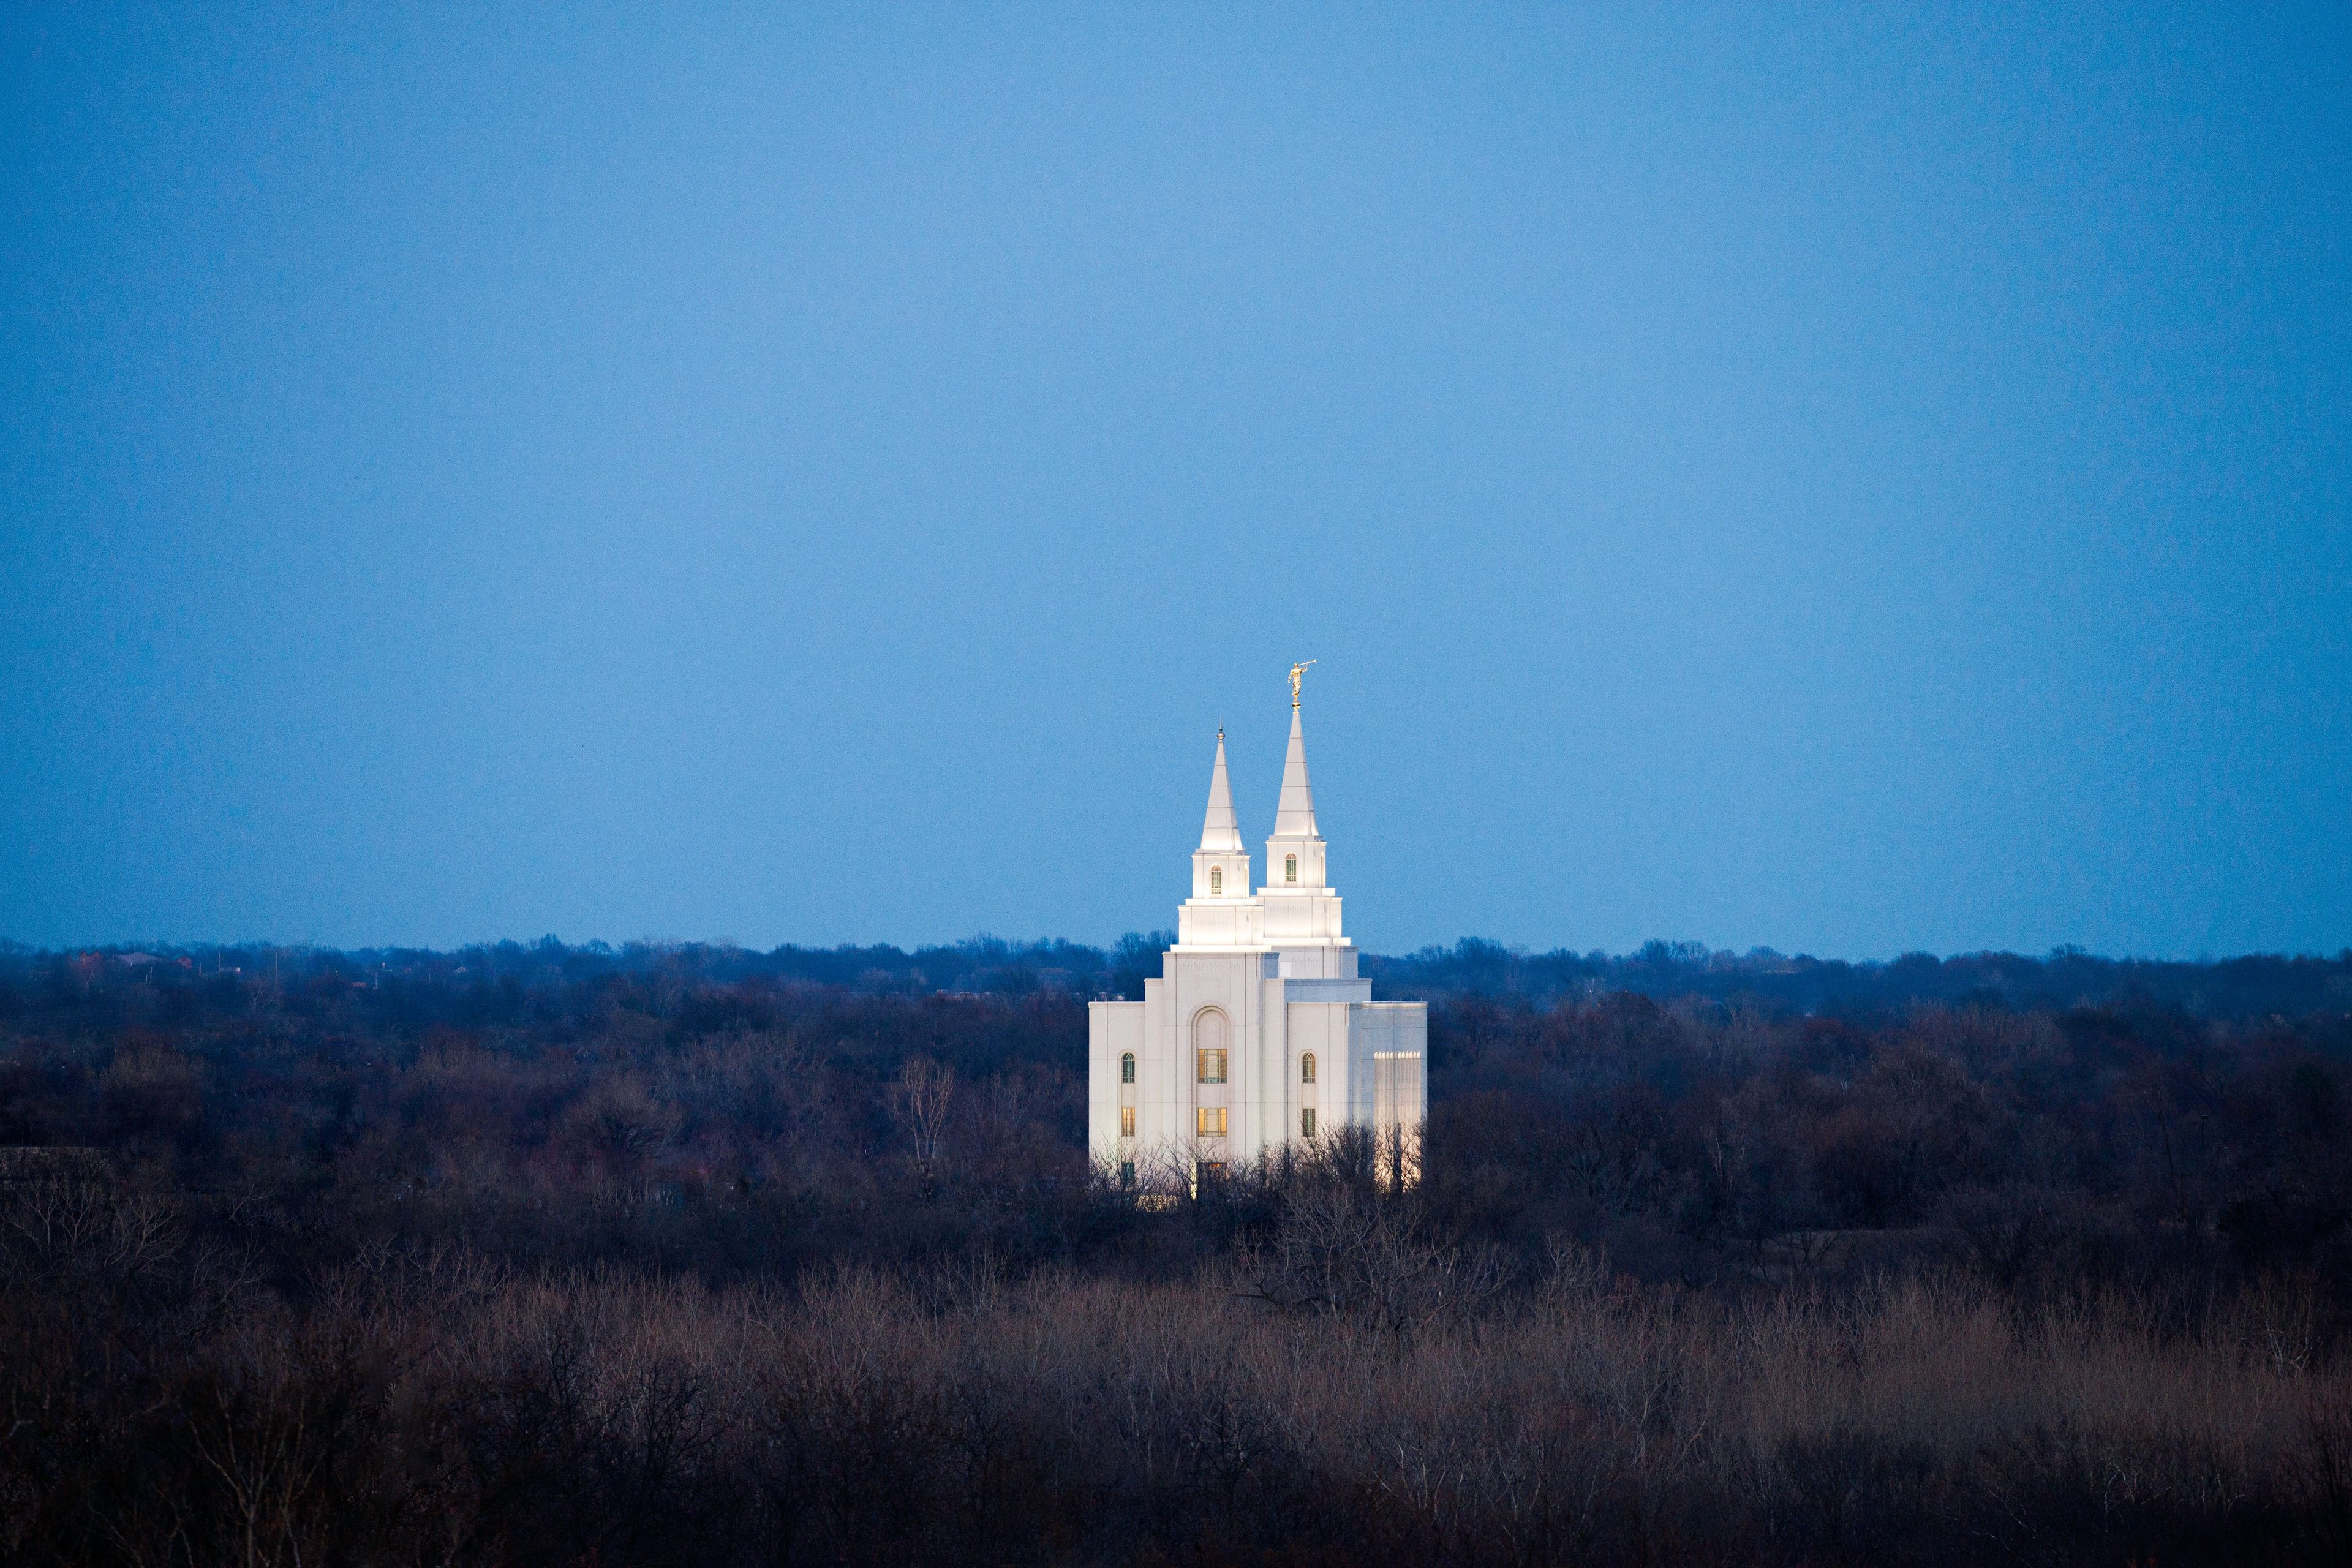 A distant view of the Kansas City Missouri Temple at night. The temple extends above the tree line.  